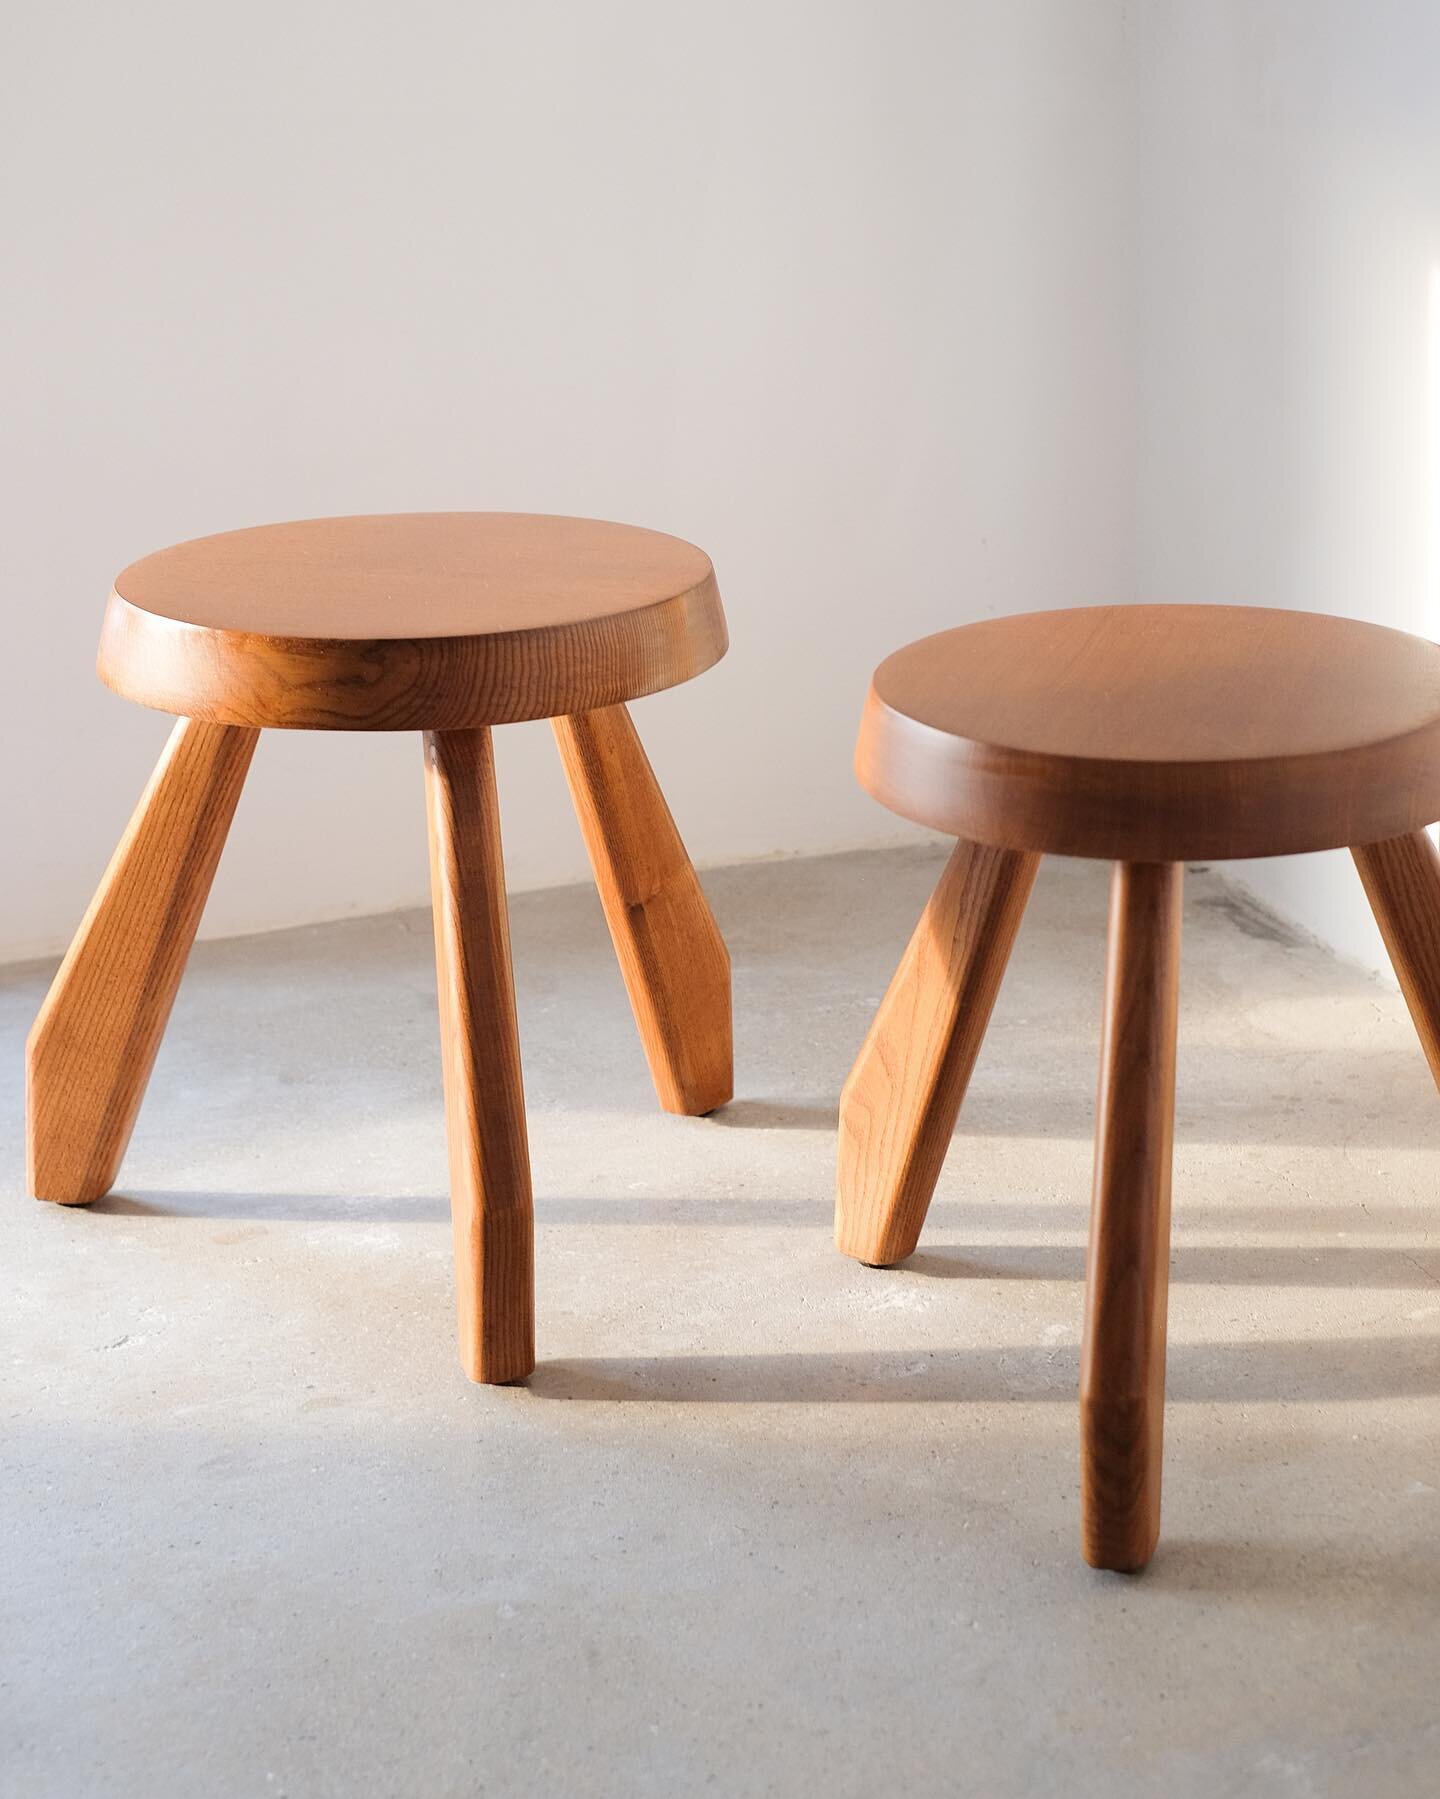 The Spider Stool is a multifunctional everyday furniture suitable for use as a side table, a nightstand, and a chair. The design takes its cues from a curation of vintage standards. Available in Honey and Provincial finishes. Solid Ash.